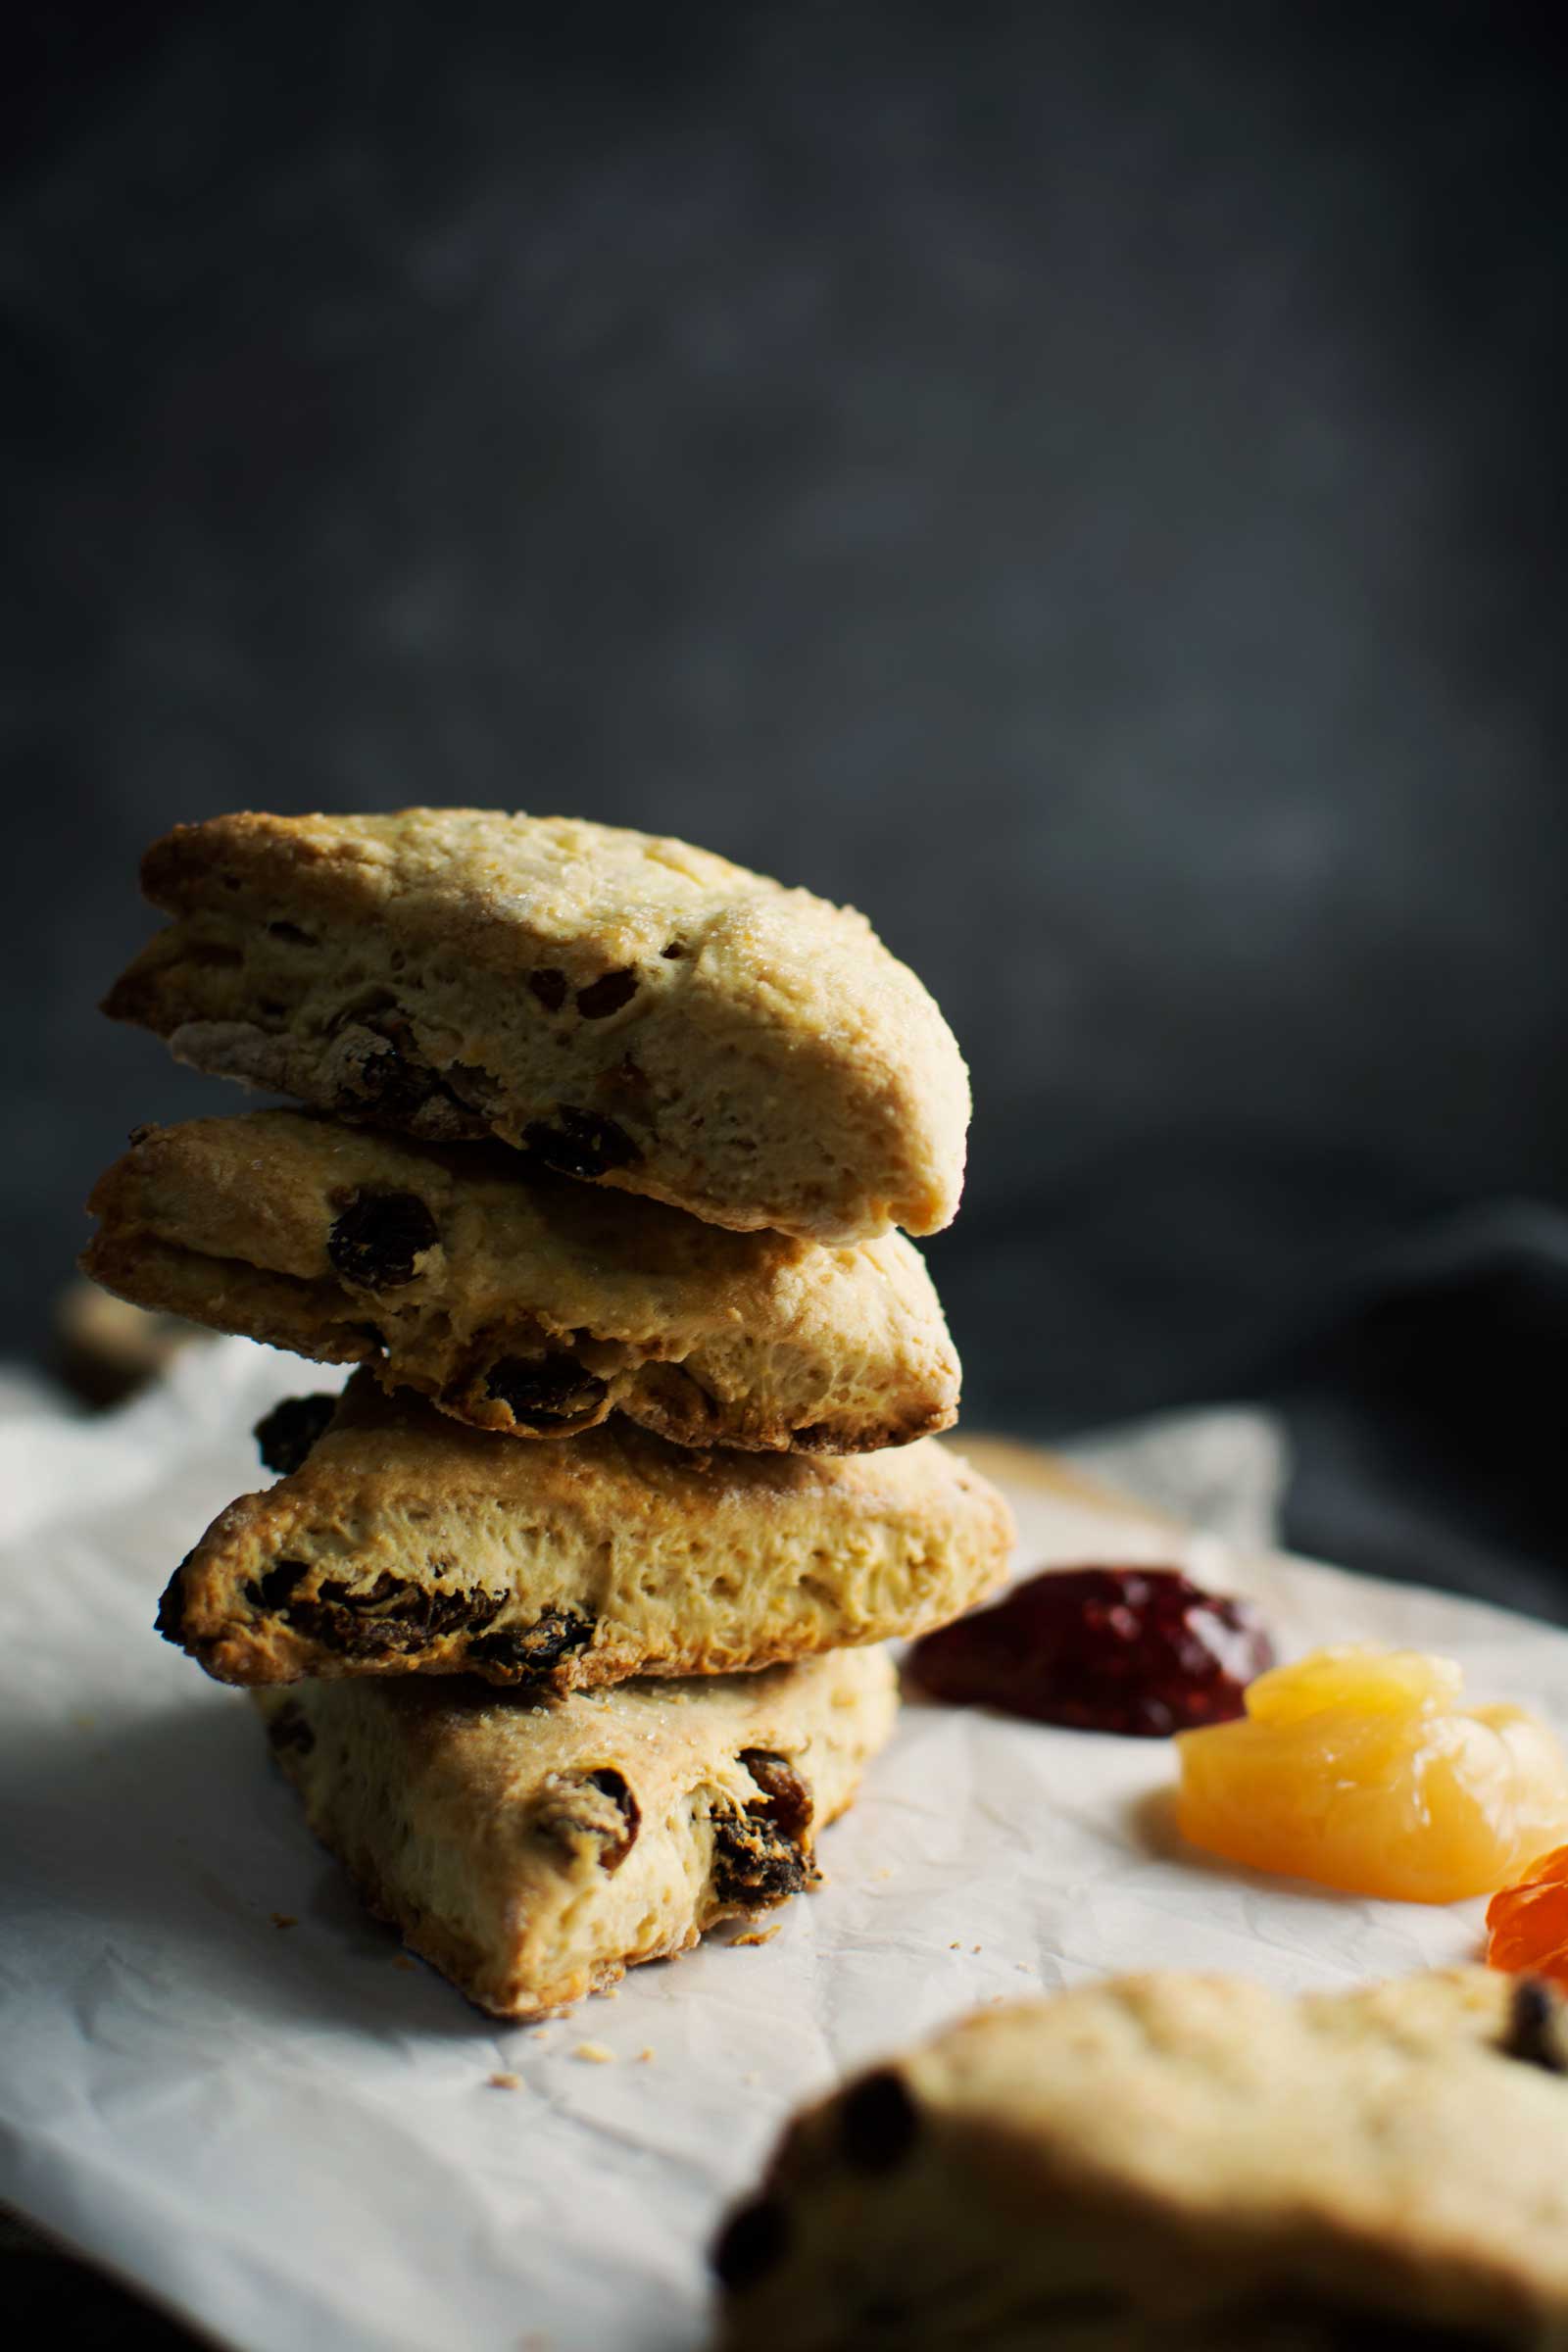 Easy to make & perfect for gifts from the kitchen, Orange Scented Raisin Scone Mix! Get the recipe from @LittleFiggyFood